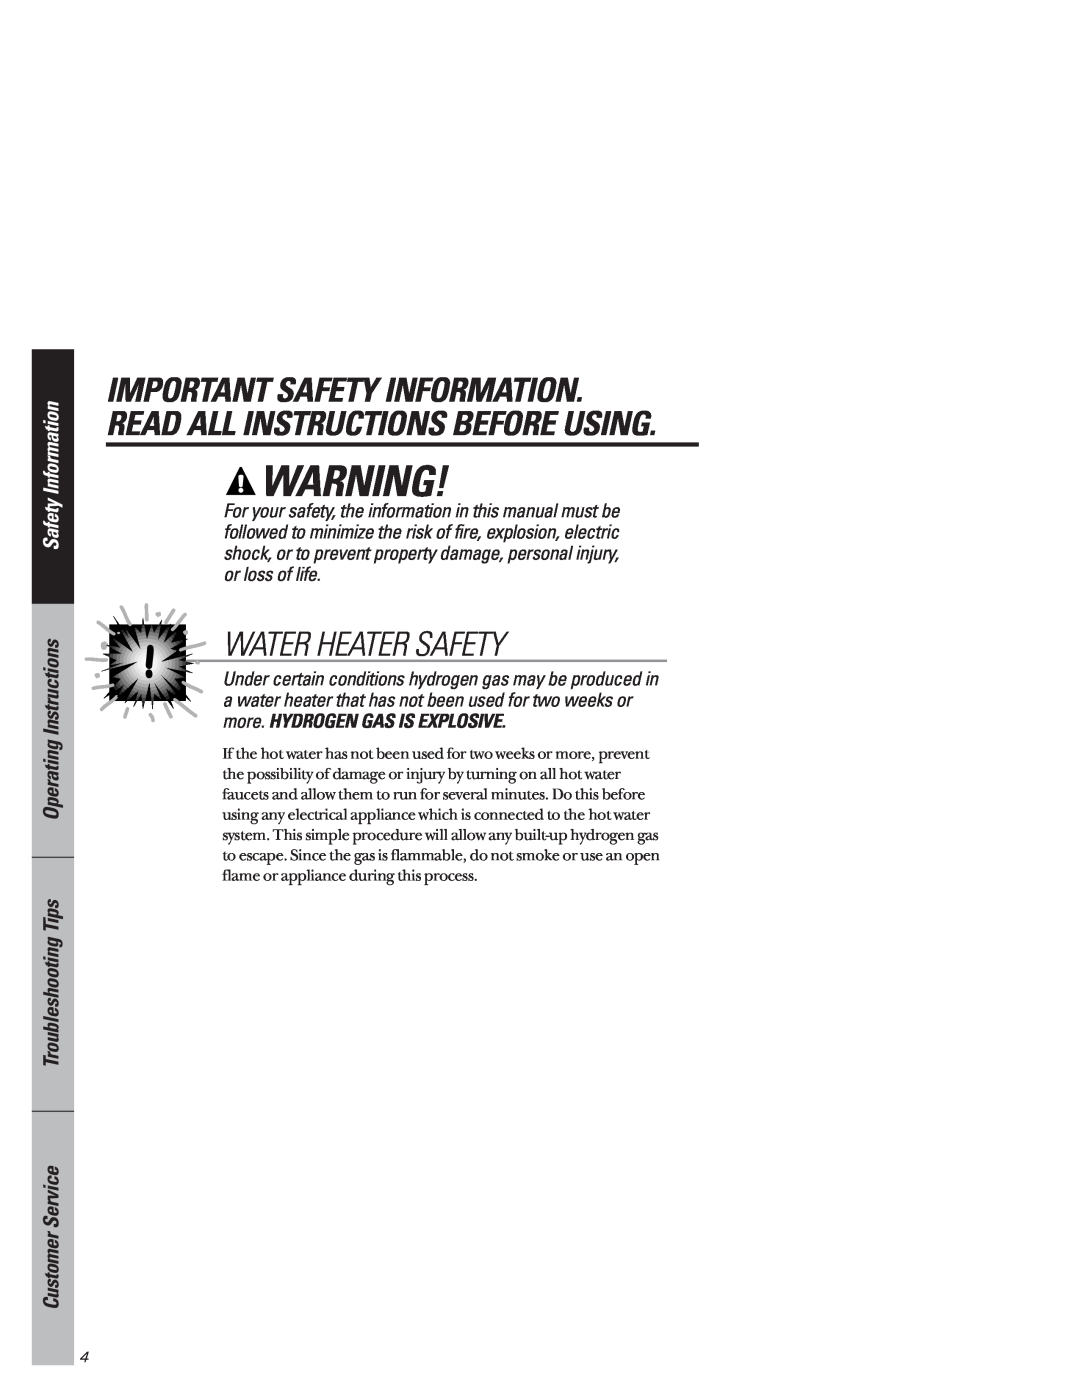 GE GSD4610 owner manual Water Heater Safety, Important Safety Information. Read All Instructions Before Using 